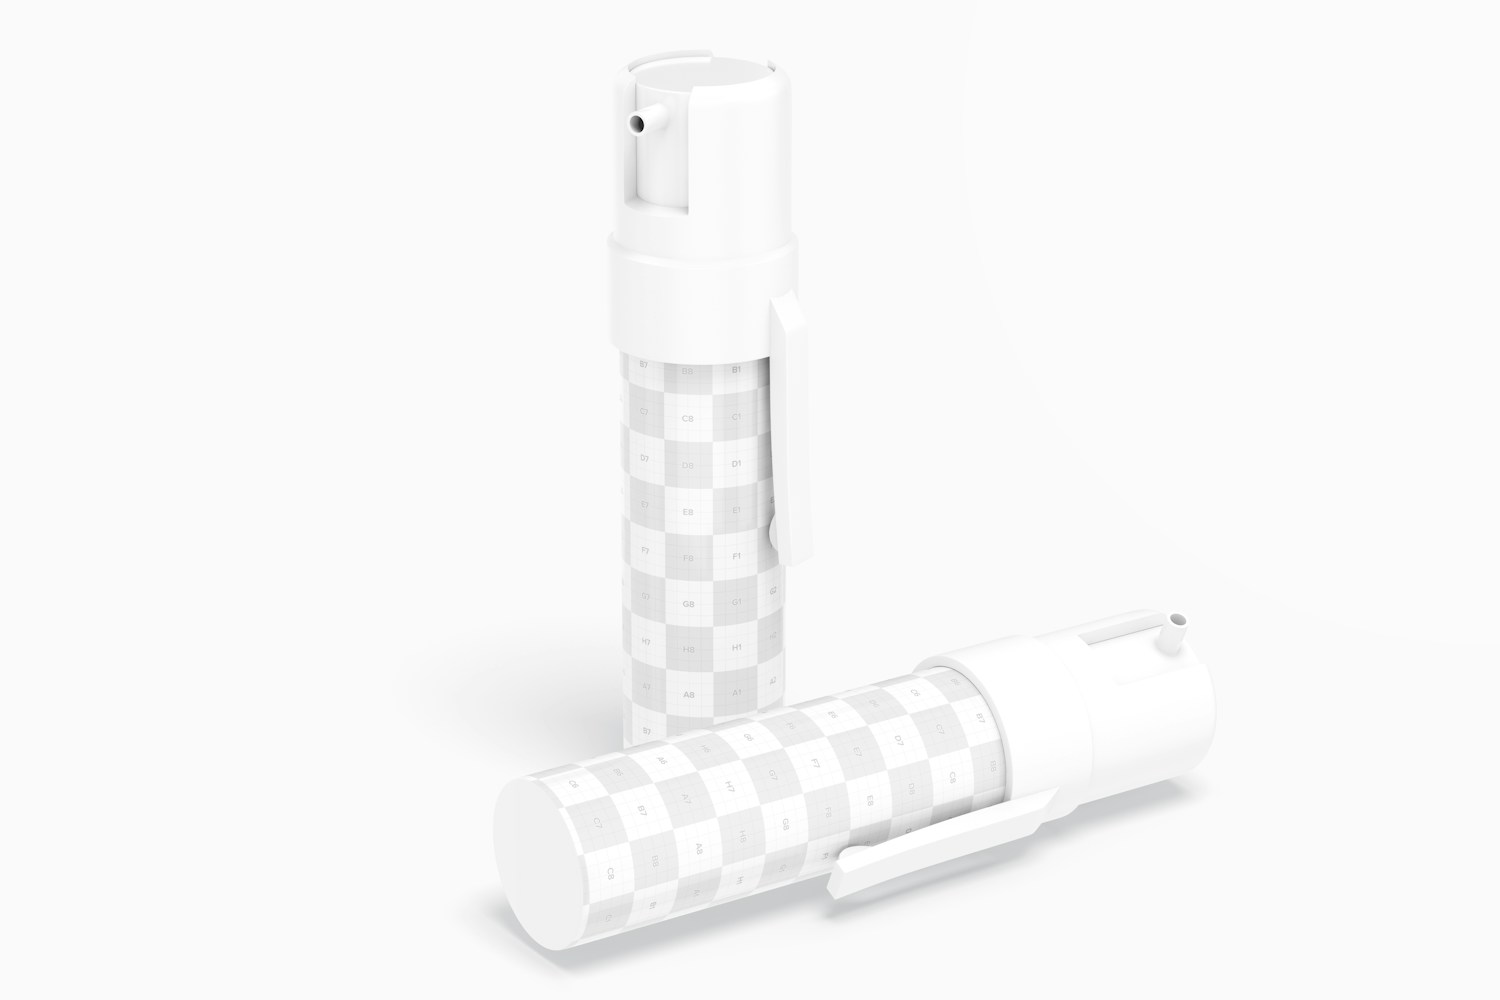 Pepper Spray Bottles Mockup, Standing and Dropped